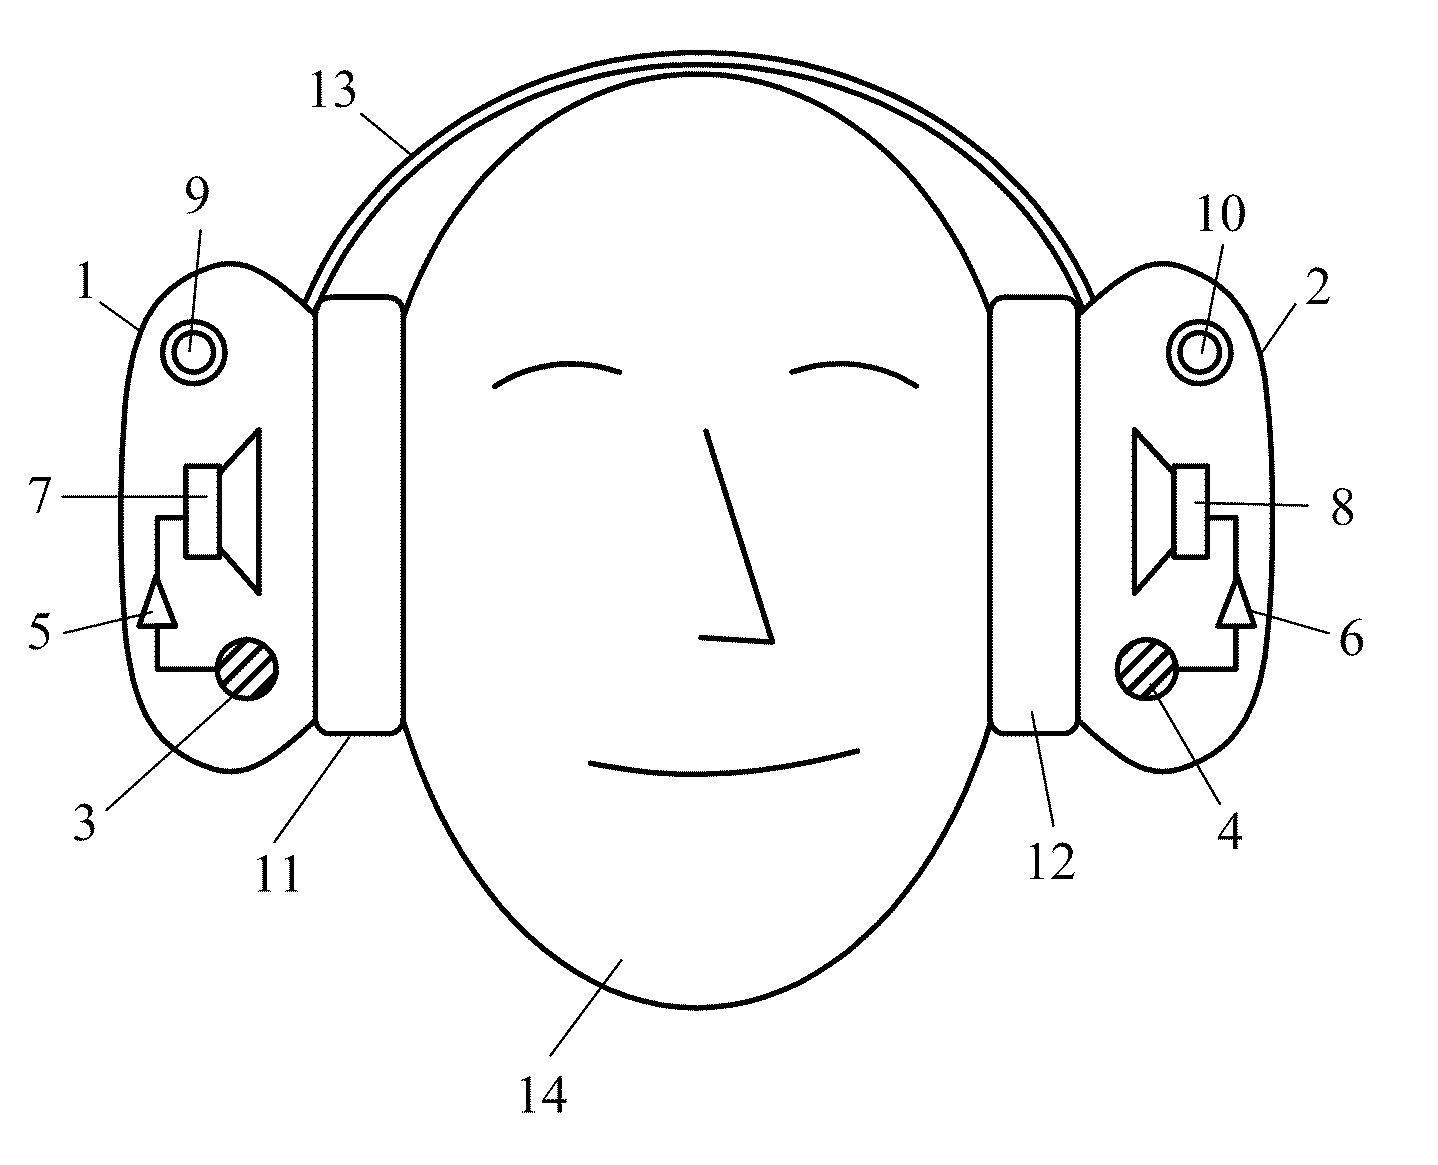 Talk-Through Listening Device Channel Switching